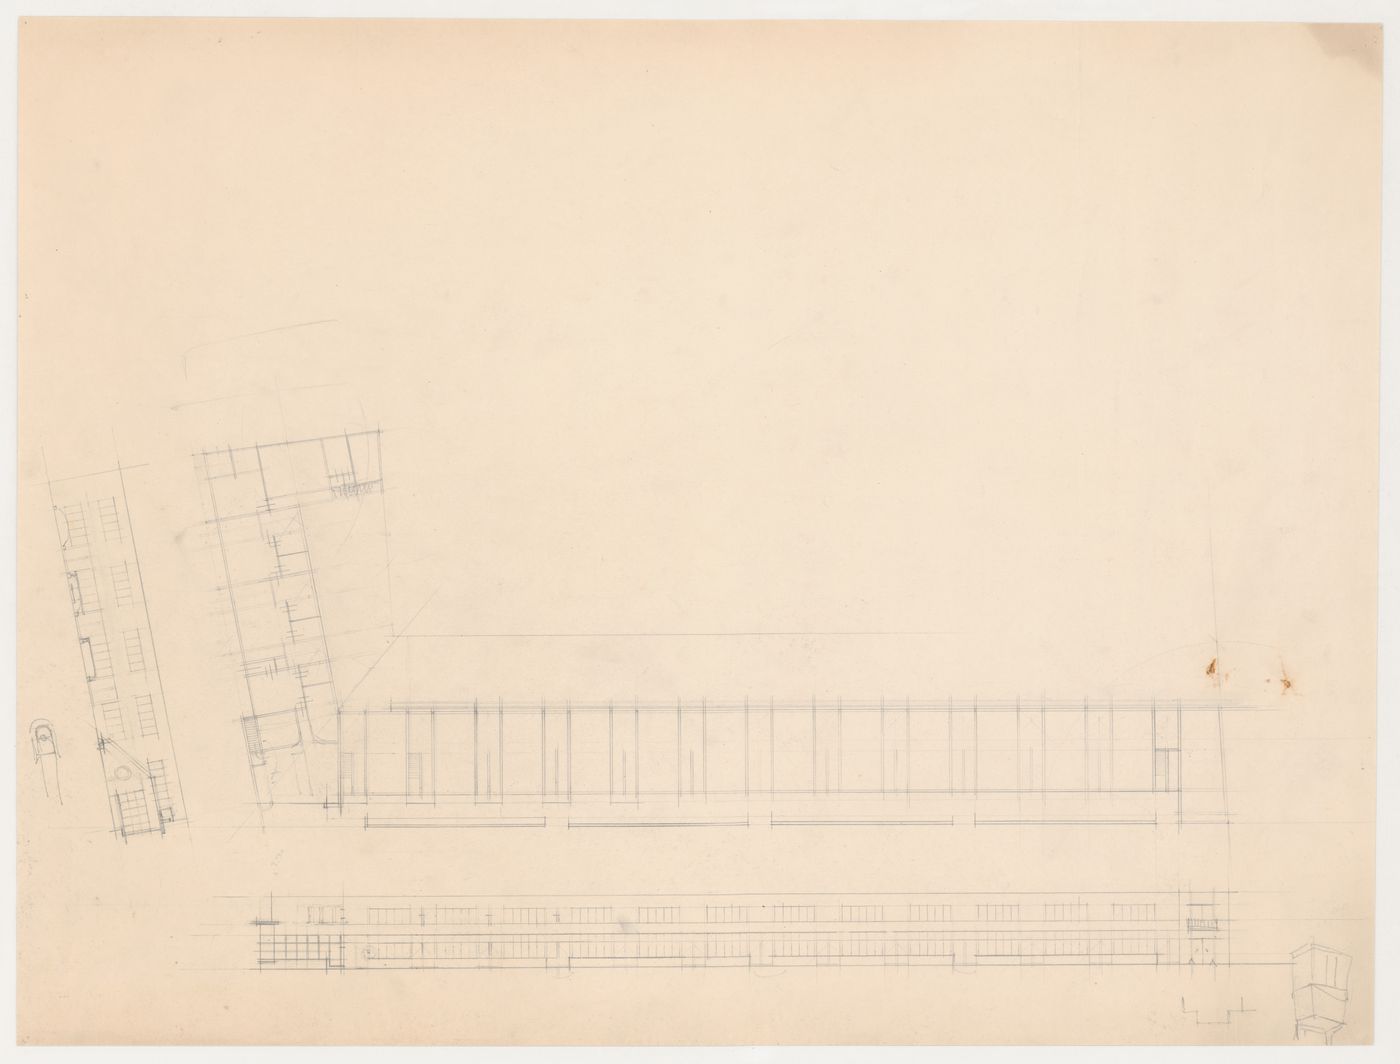 Plan and principal and lateral elevations for industrial row houses, Hoek van Holland, Netherlands